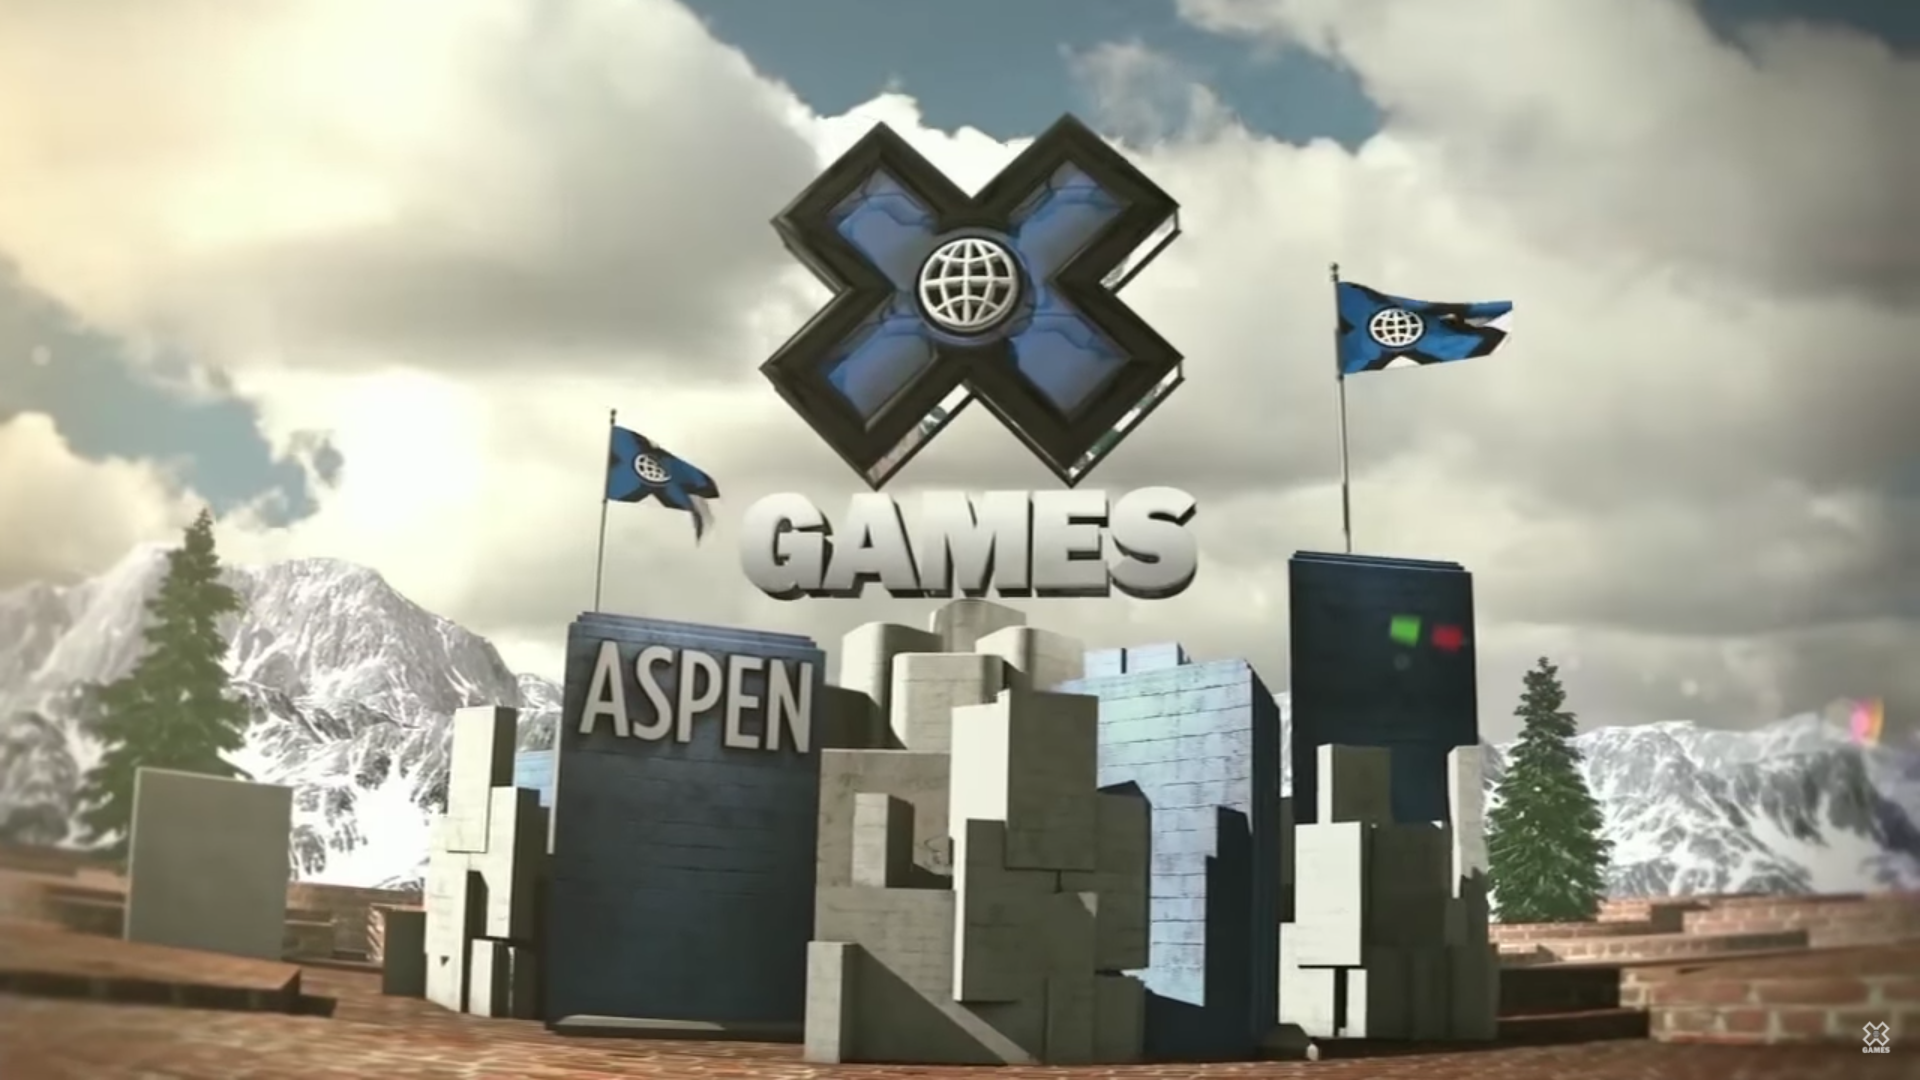 X Games Aspen 2018 graphic design. Photo by: X Games / YouTube